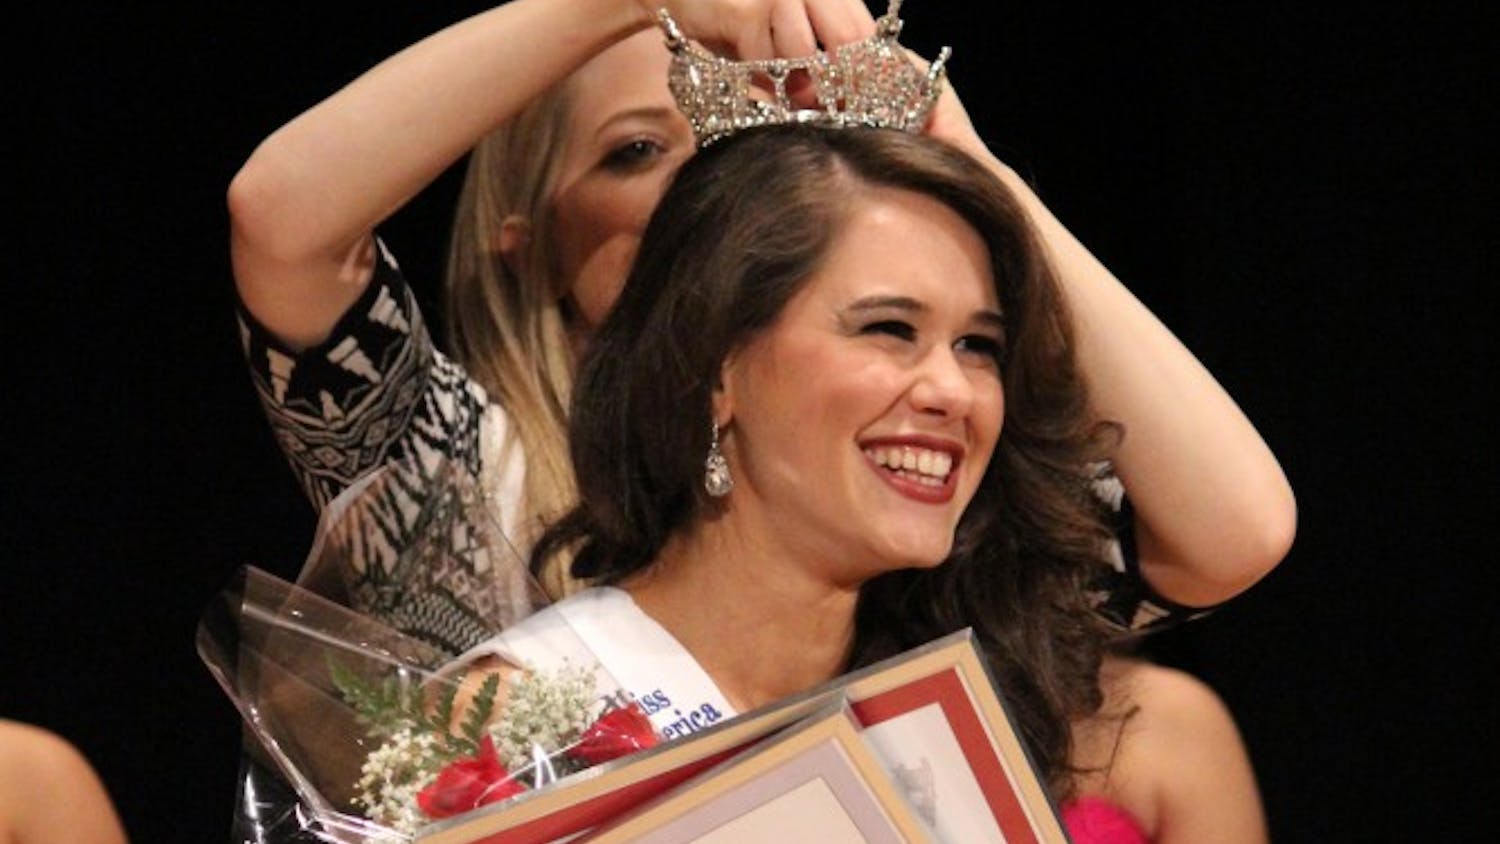 Lauren Mnayarji, a psychology and journalism major, is crowned Miss Indiana University 2015 by Miss Indiana 2014 Audra Casterline.